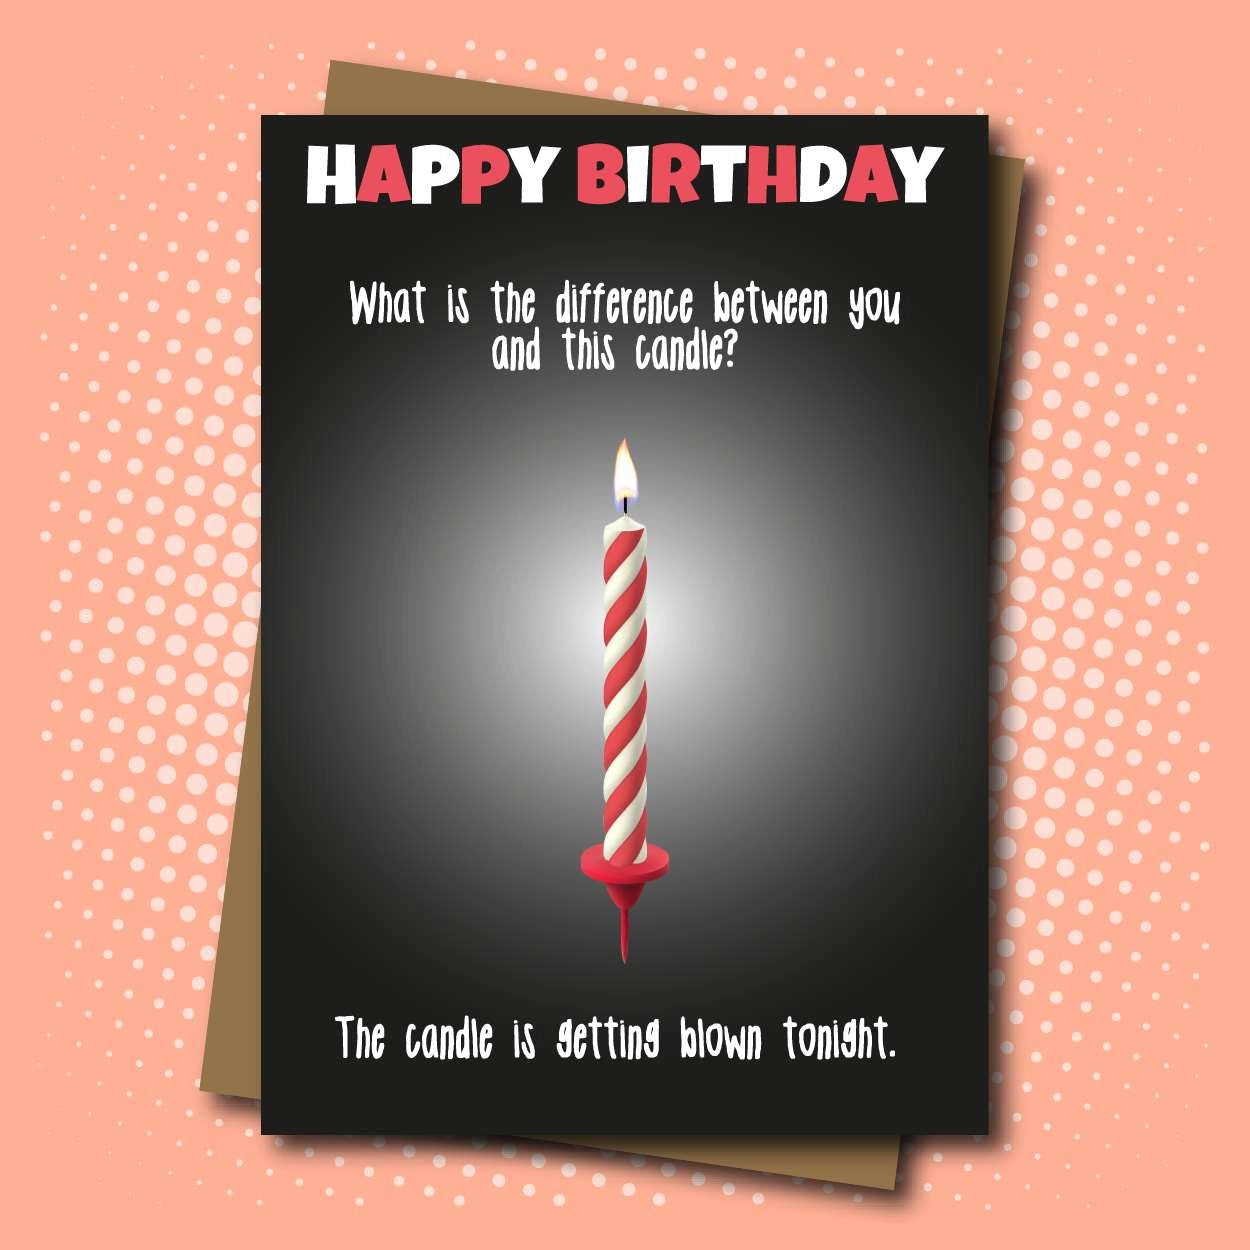 Happy Birthday. What Is The Difference Between You And This Candle?  The Candle Is Getting Blown Tonight - Jumbo Greeting Card - Mellow Monkey